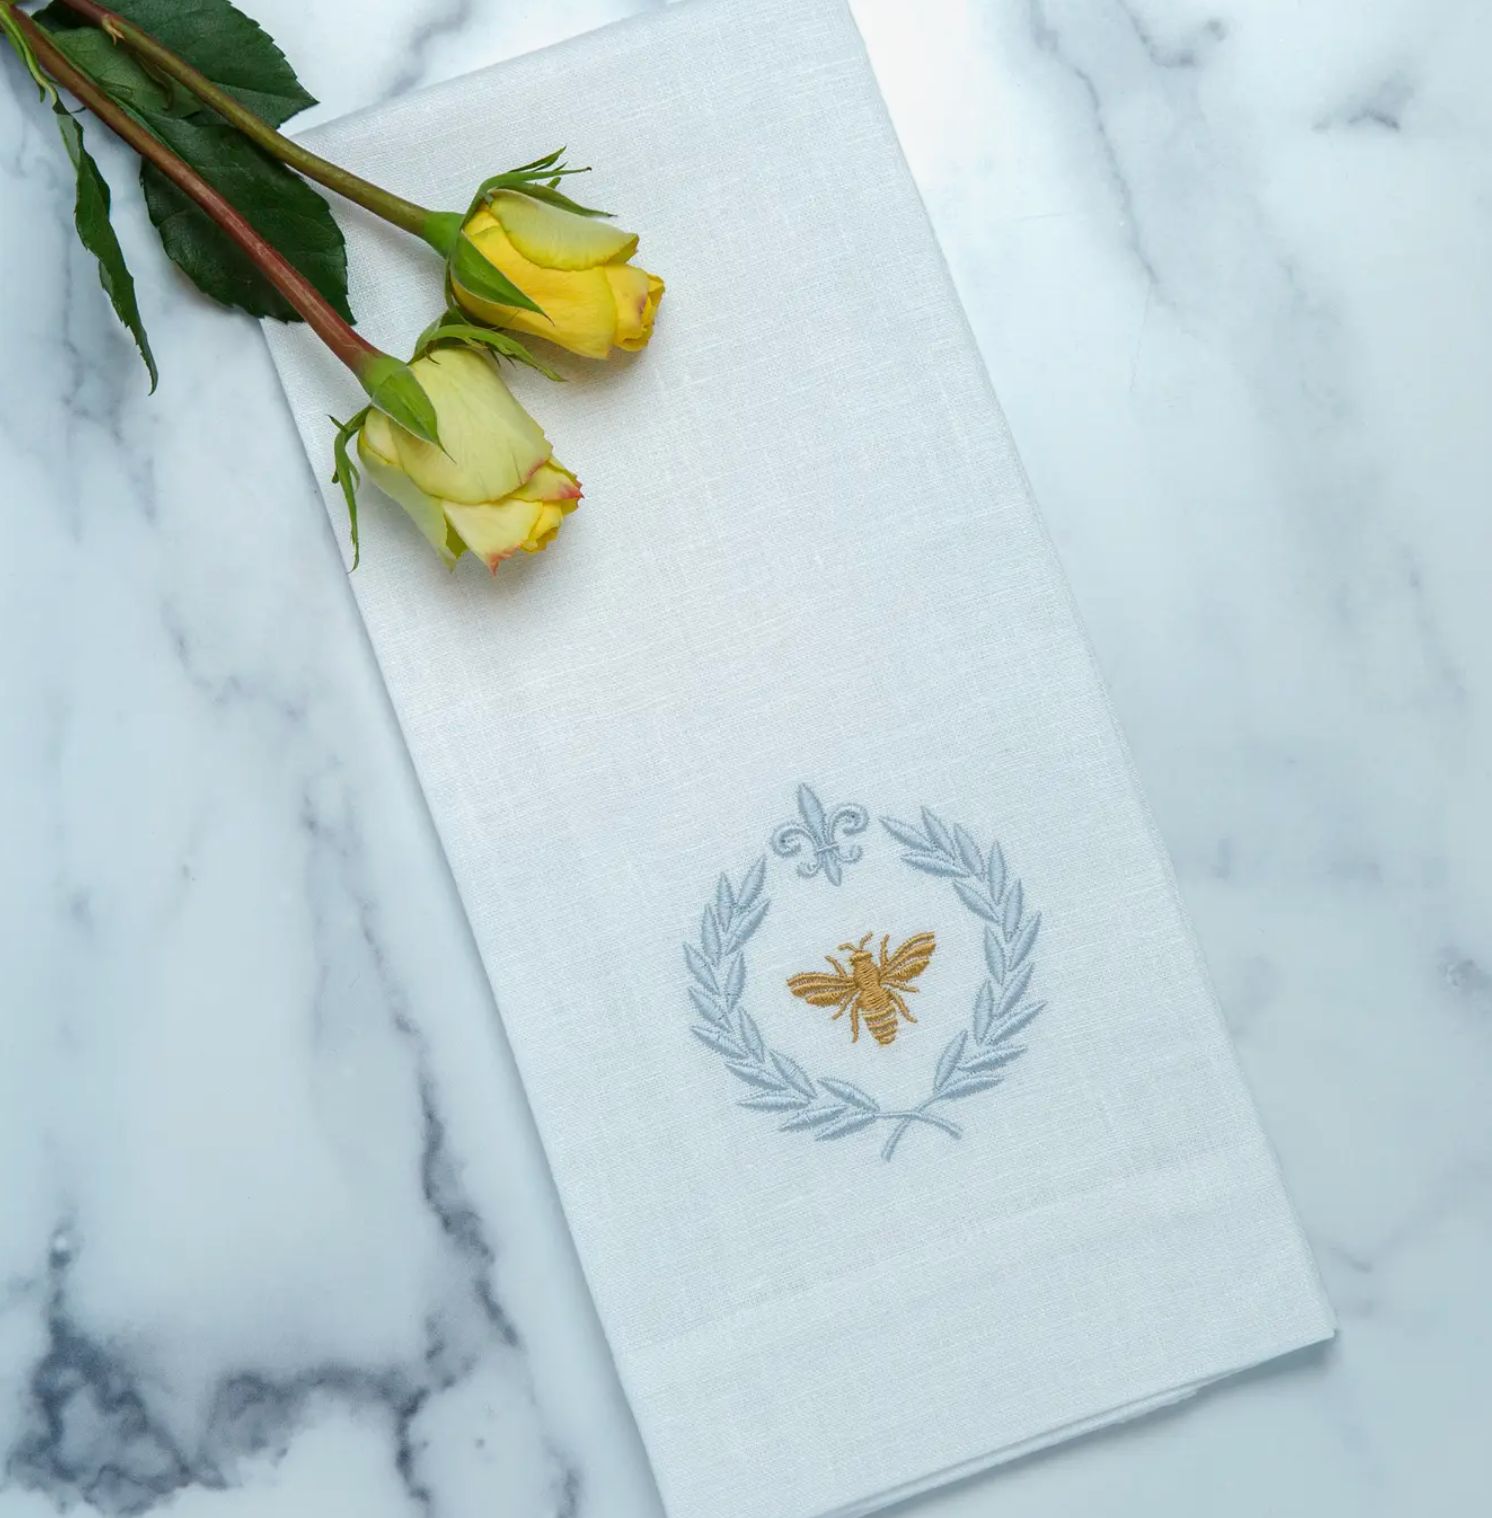 Stunning embroidered hand towel- the idea hostess gift!   Dress up that kitchen or bath with this beautiful 100% European linen embroidered towel. So many ways to add beauty to any part of your home. Machine wash and iron flat for a crisp look. Measures 17